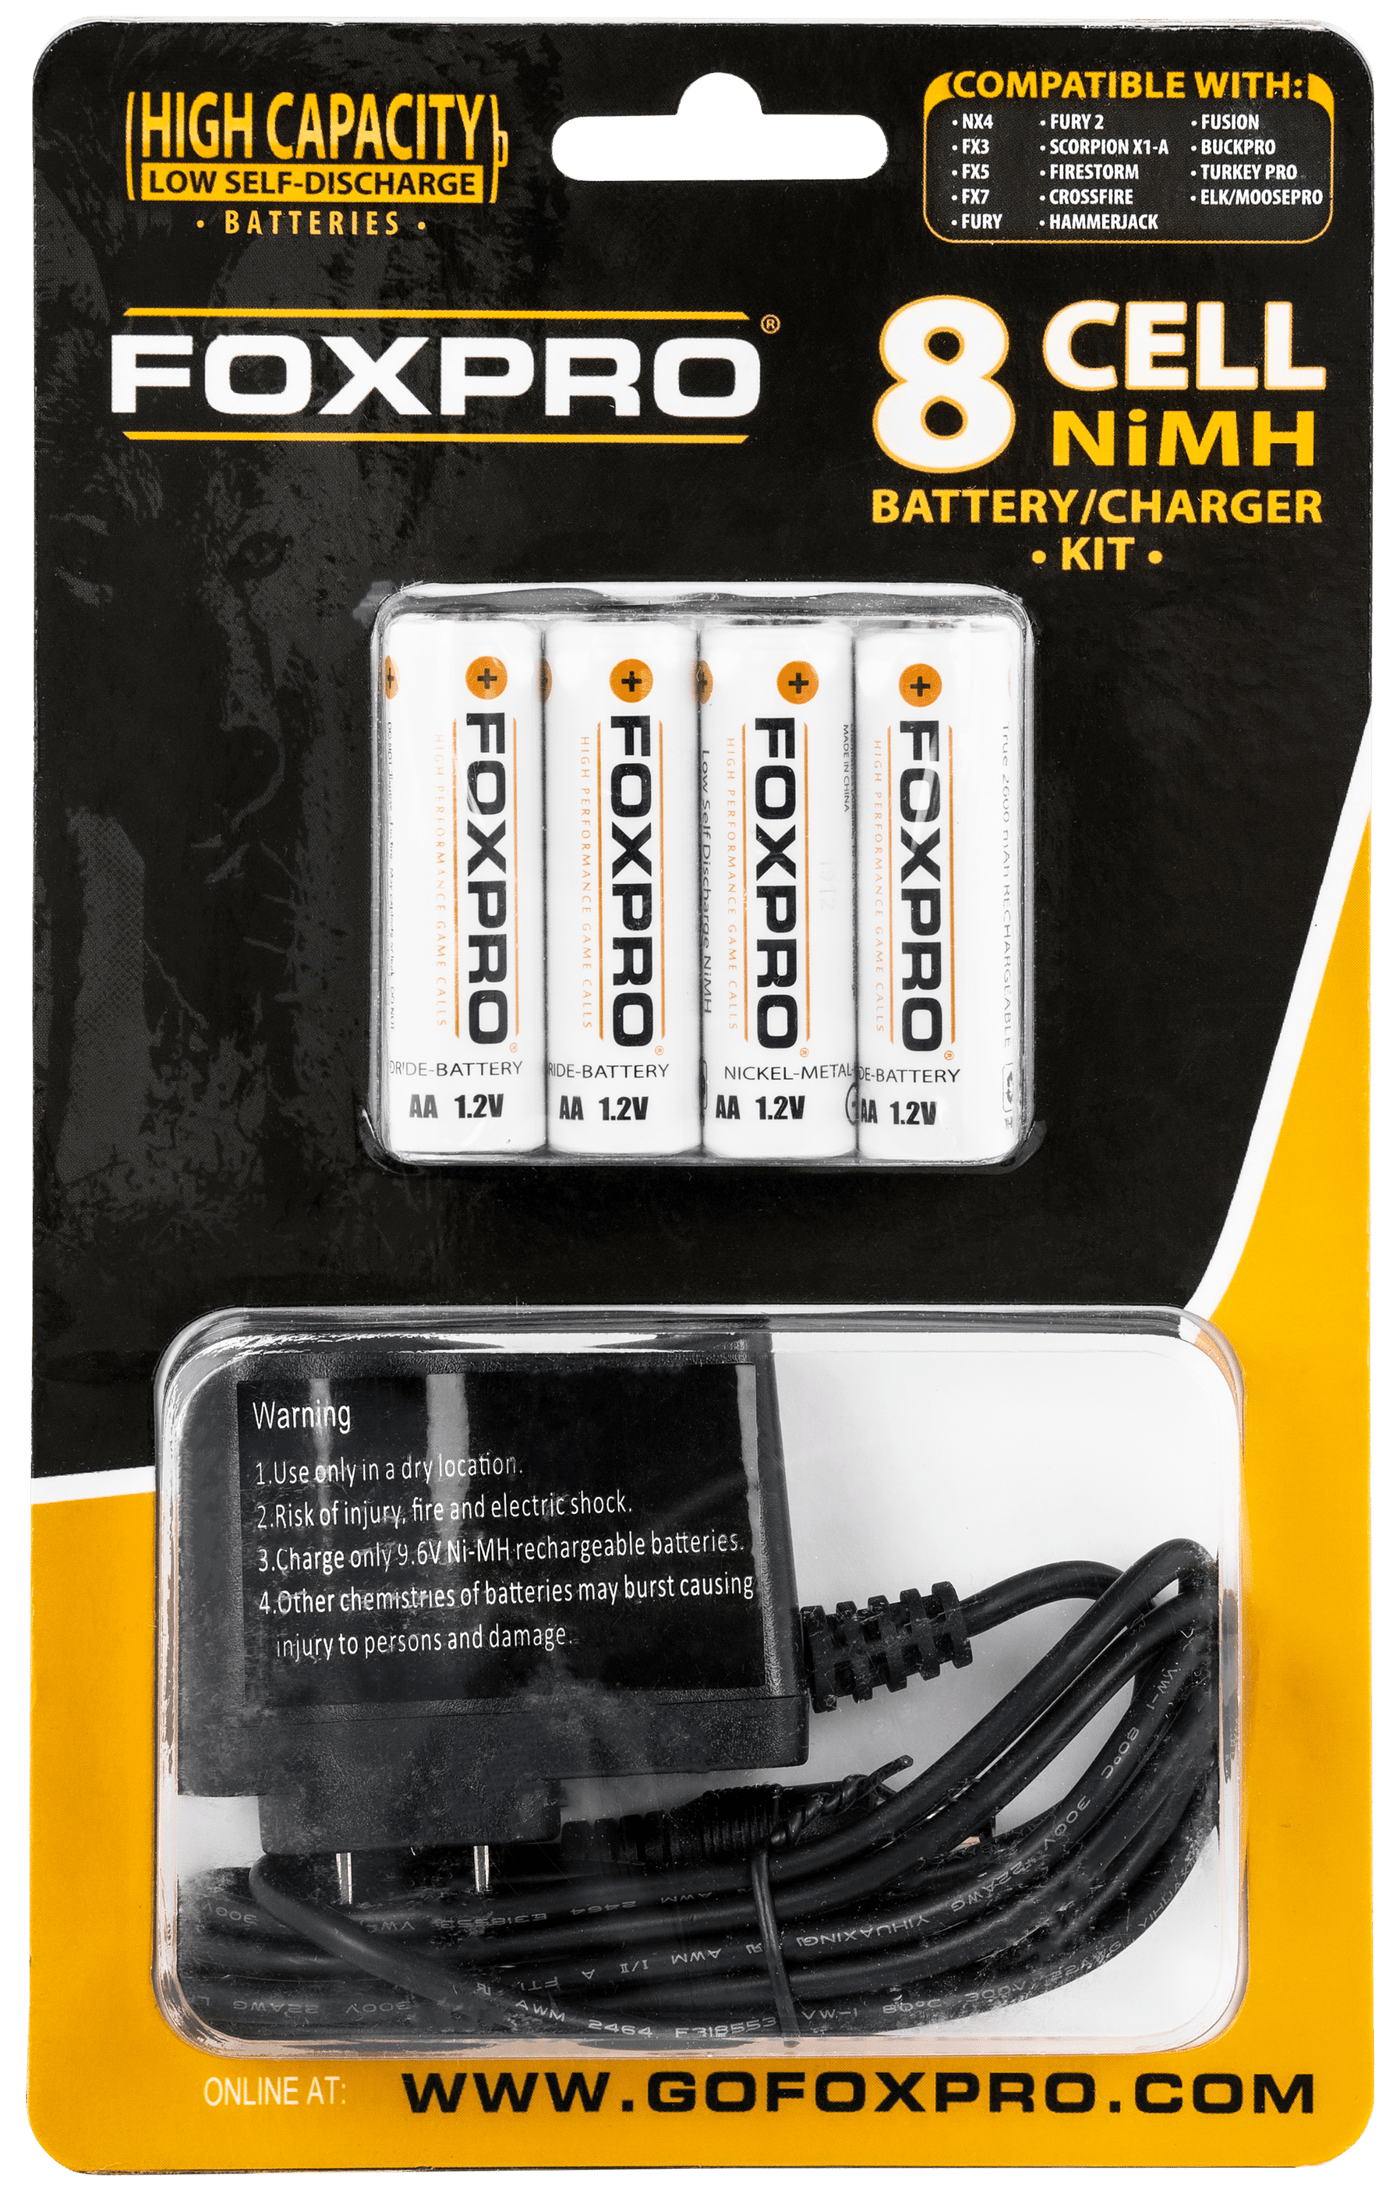 Foxpro Foxpro Nimh Charger 2, Foxpro  Fxnimhchg      Nimh Charger 2 Accessories